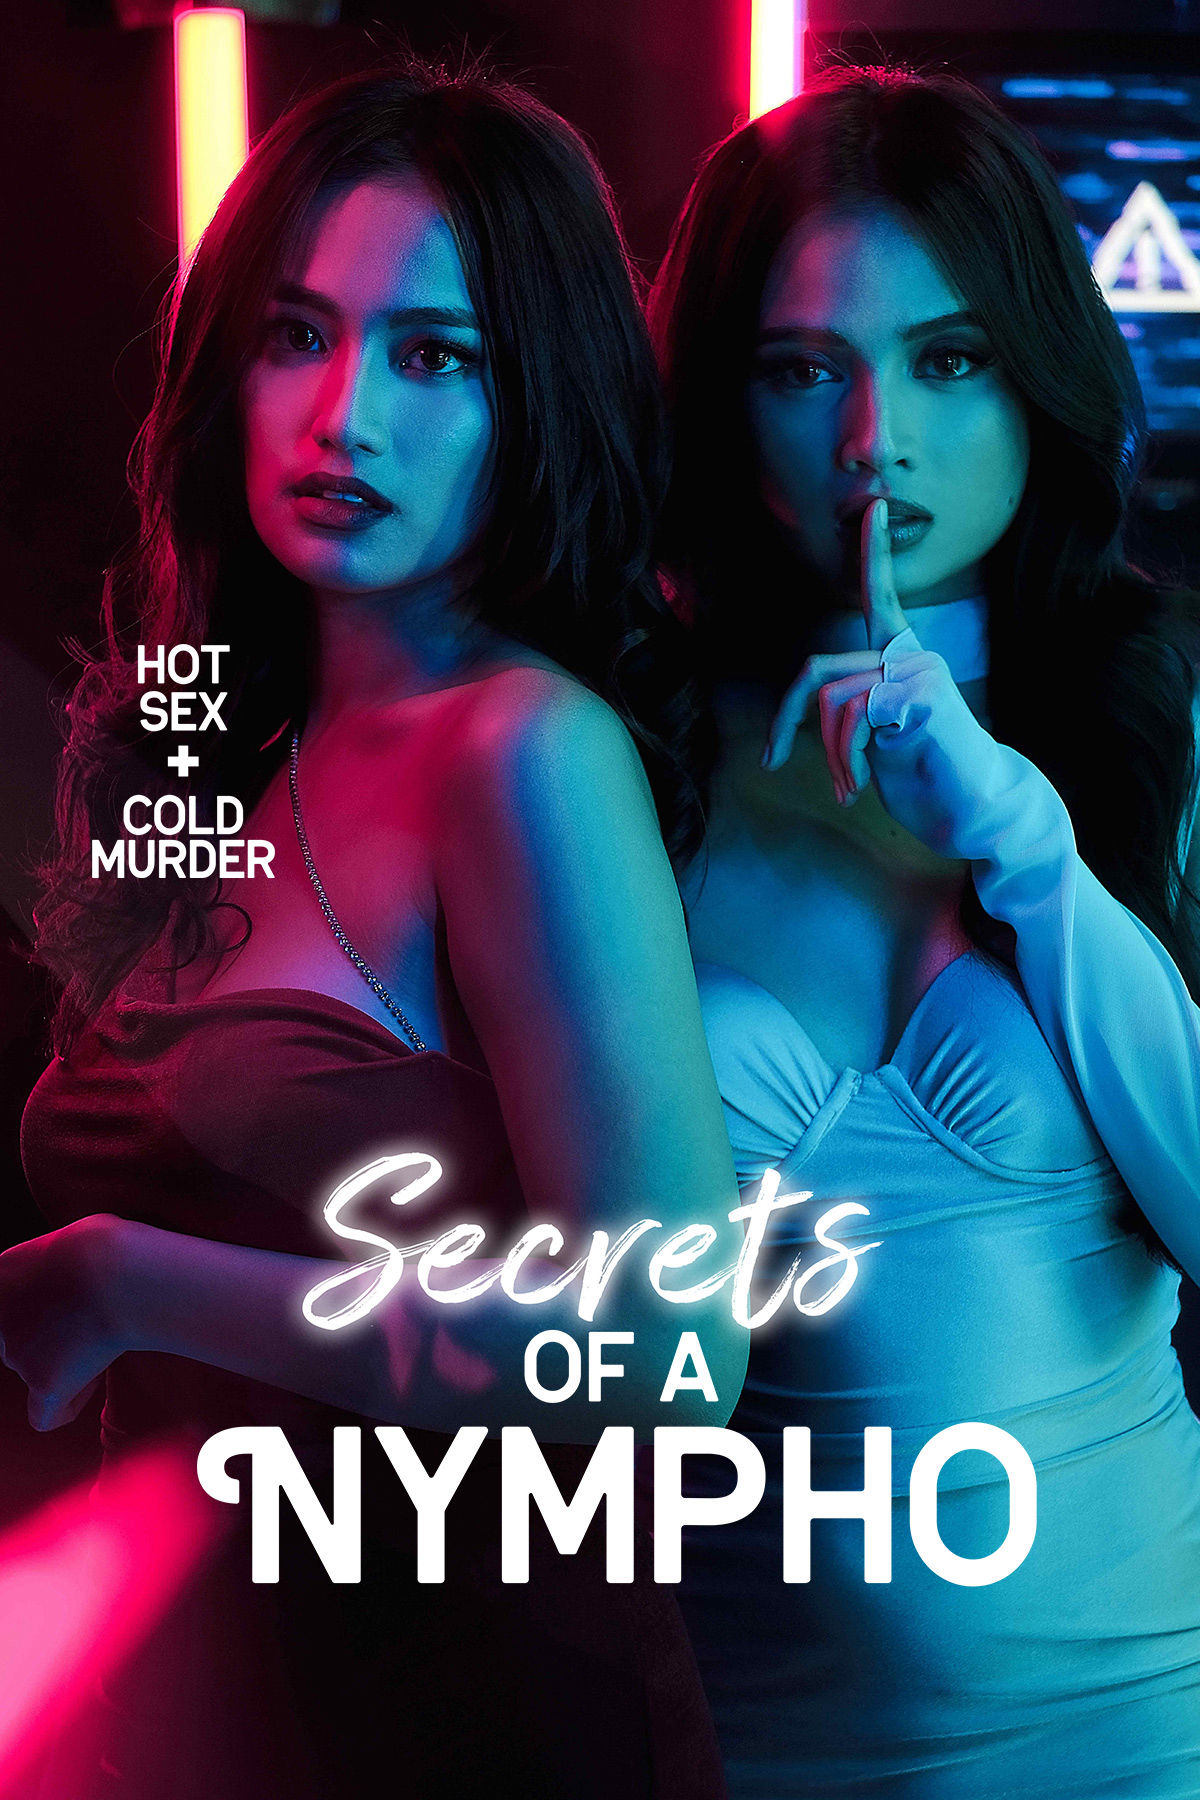 You are currently viewing Secrets of a Nympho 2022 VivaMax S01E05 Hot Web Series 720p HDRip 250MB Download & Watch Online